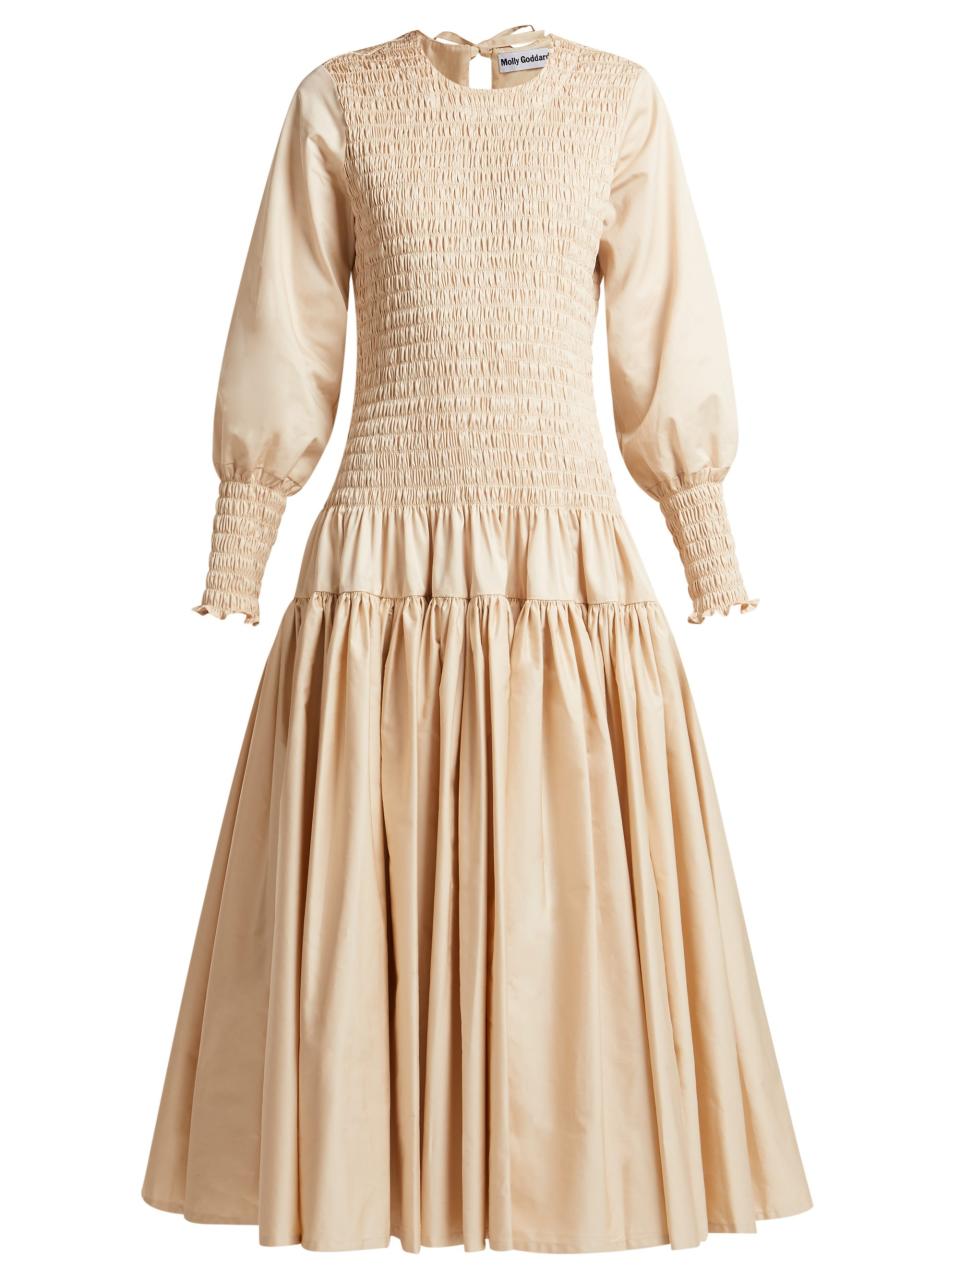 Molly Goddard dress, from Matches (£1,095)